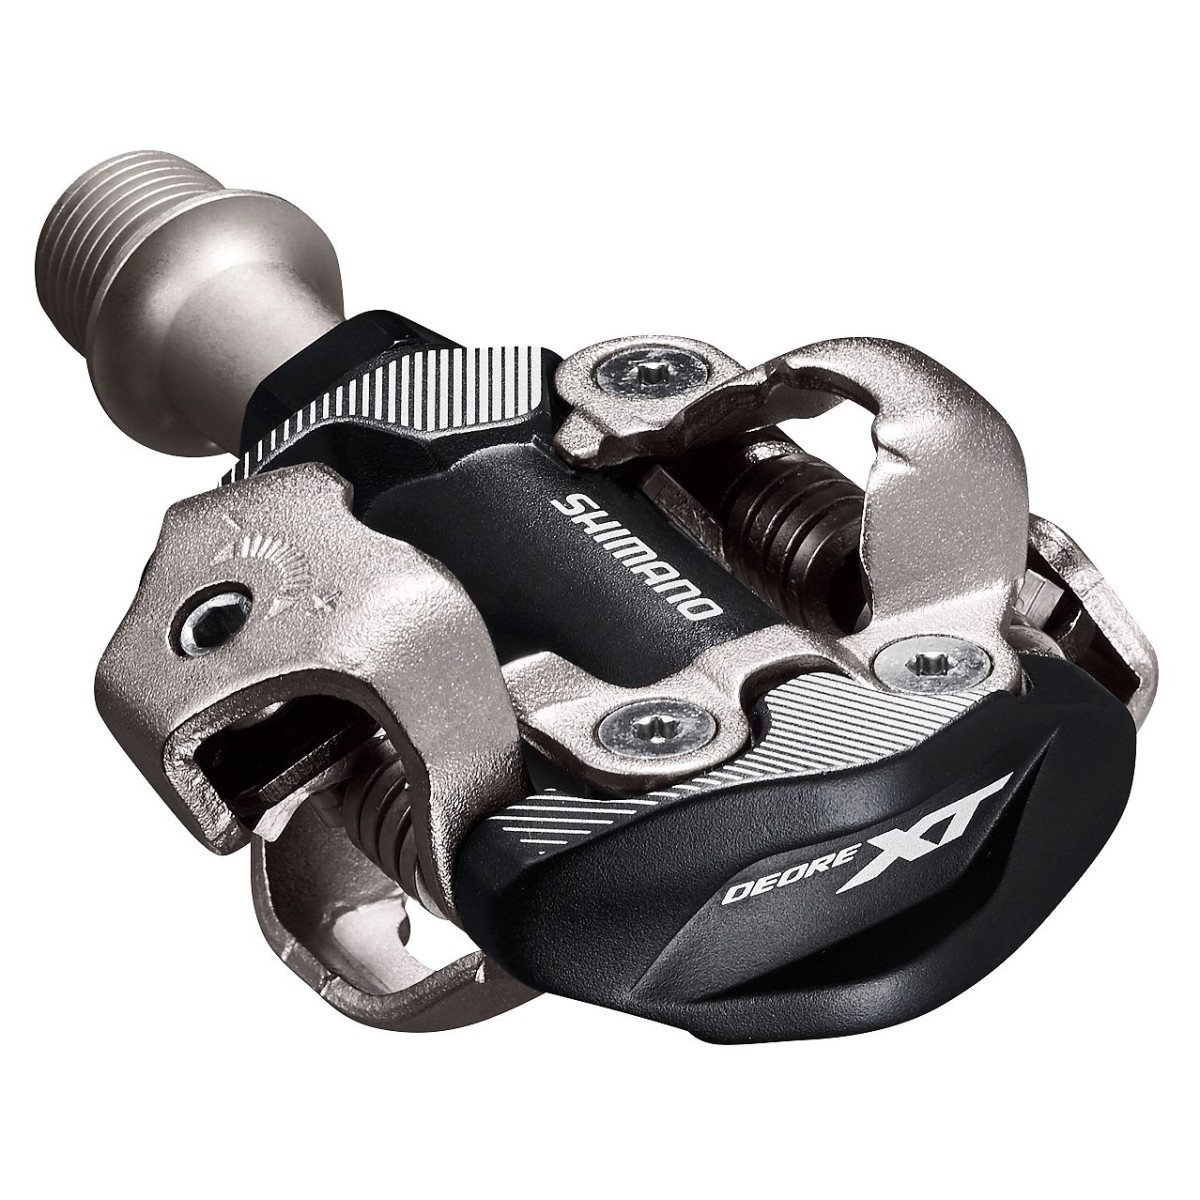 SHIMANO pedals DEORE XT PD-M8100